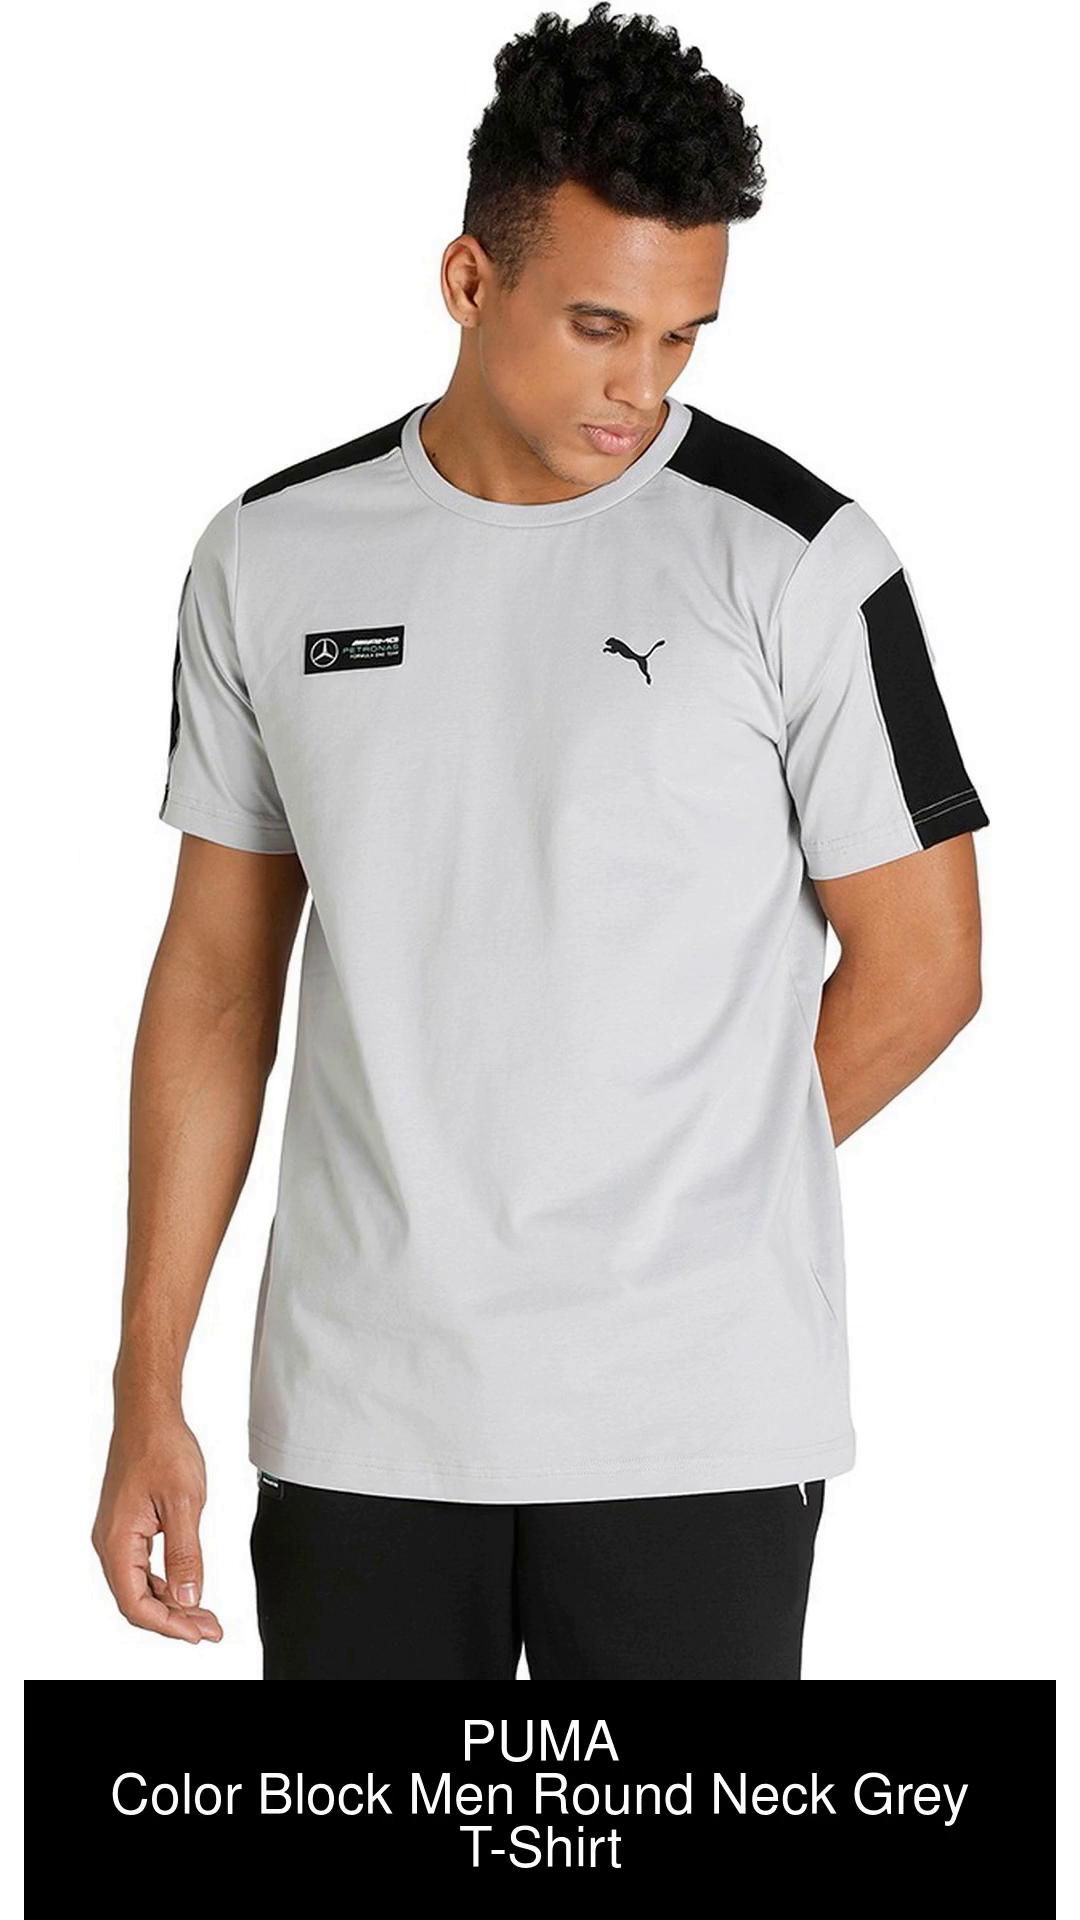 PUMA Colorblock Men Round Neck Grey T-Shirt - Buy PUMA Colorblock Men Round  Neck Grey T-Shirt Online at Best Prices in India